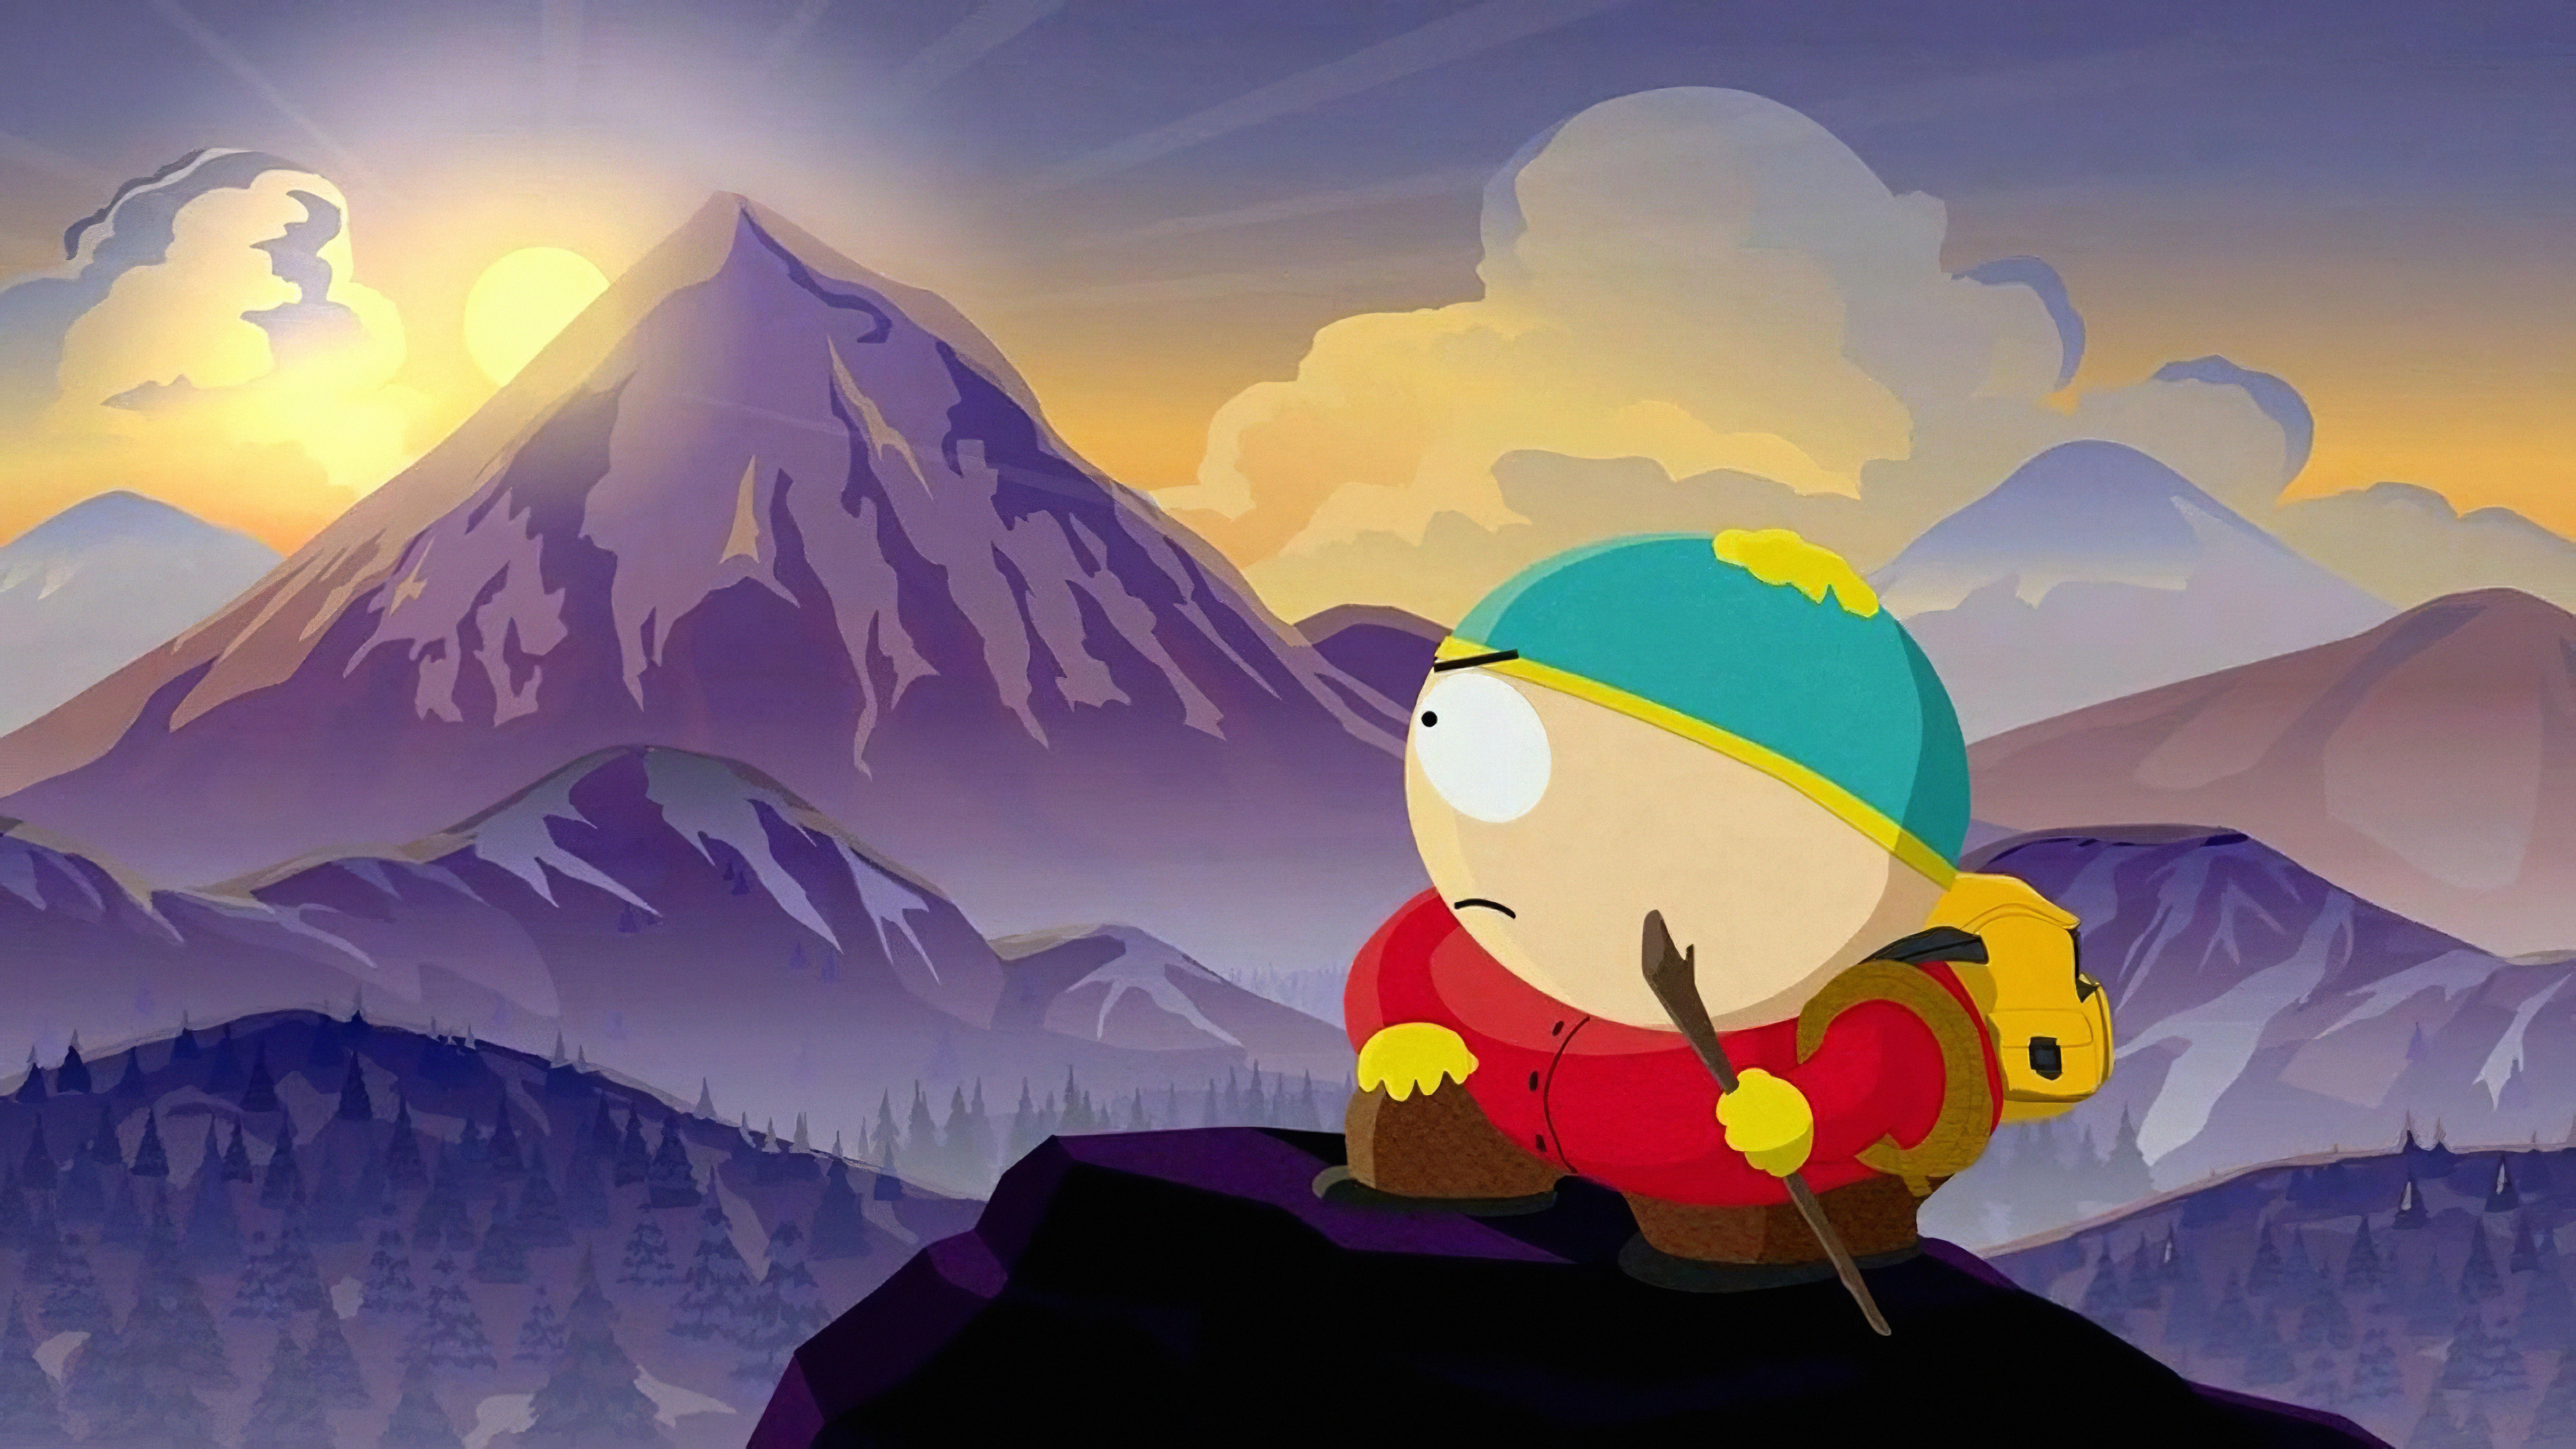 Download South Park wallpapers for mobile phone free South Park HD  pictures